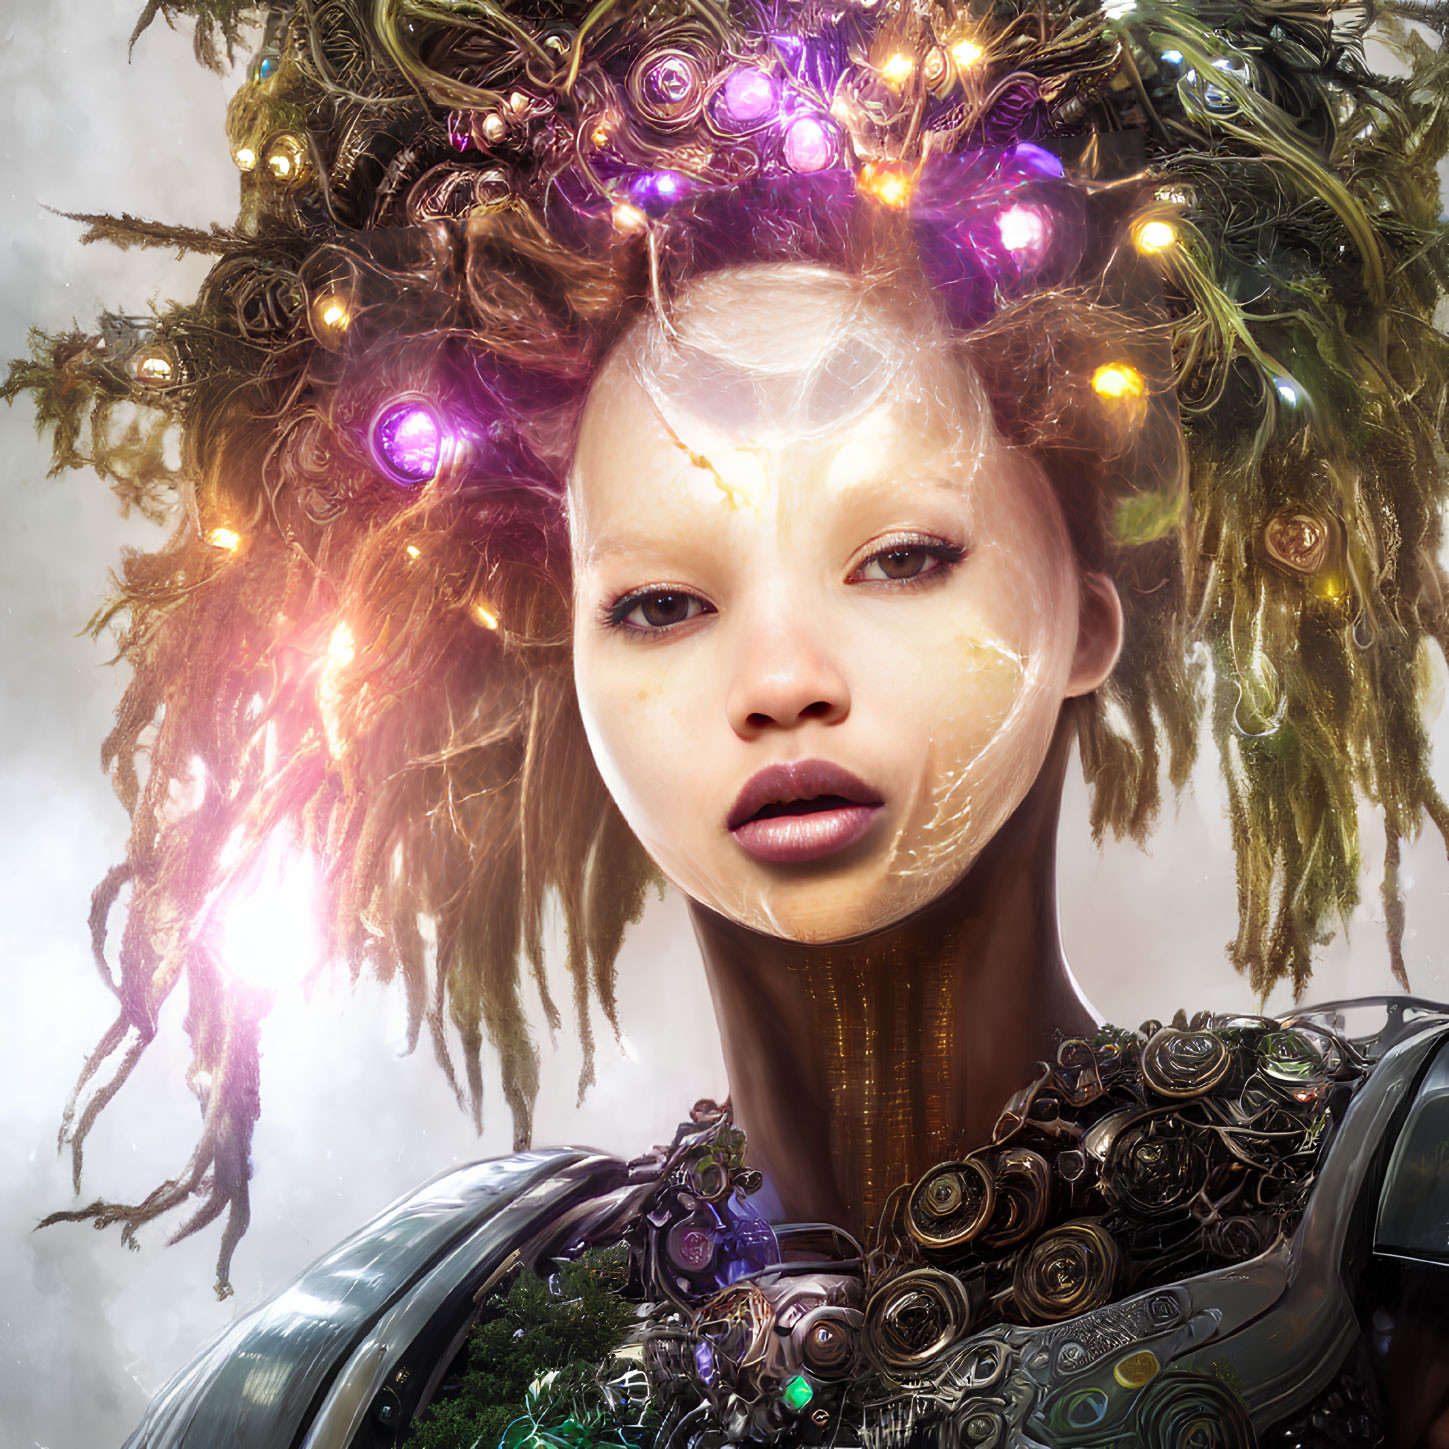 Portrait of a woman with illuminated orbs, tree branches in hair, mechanical details, dreamlike atmosphere